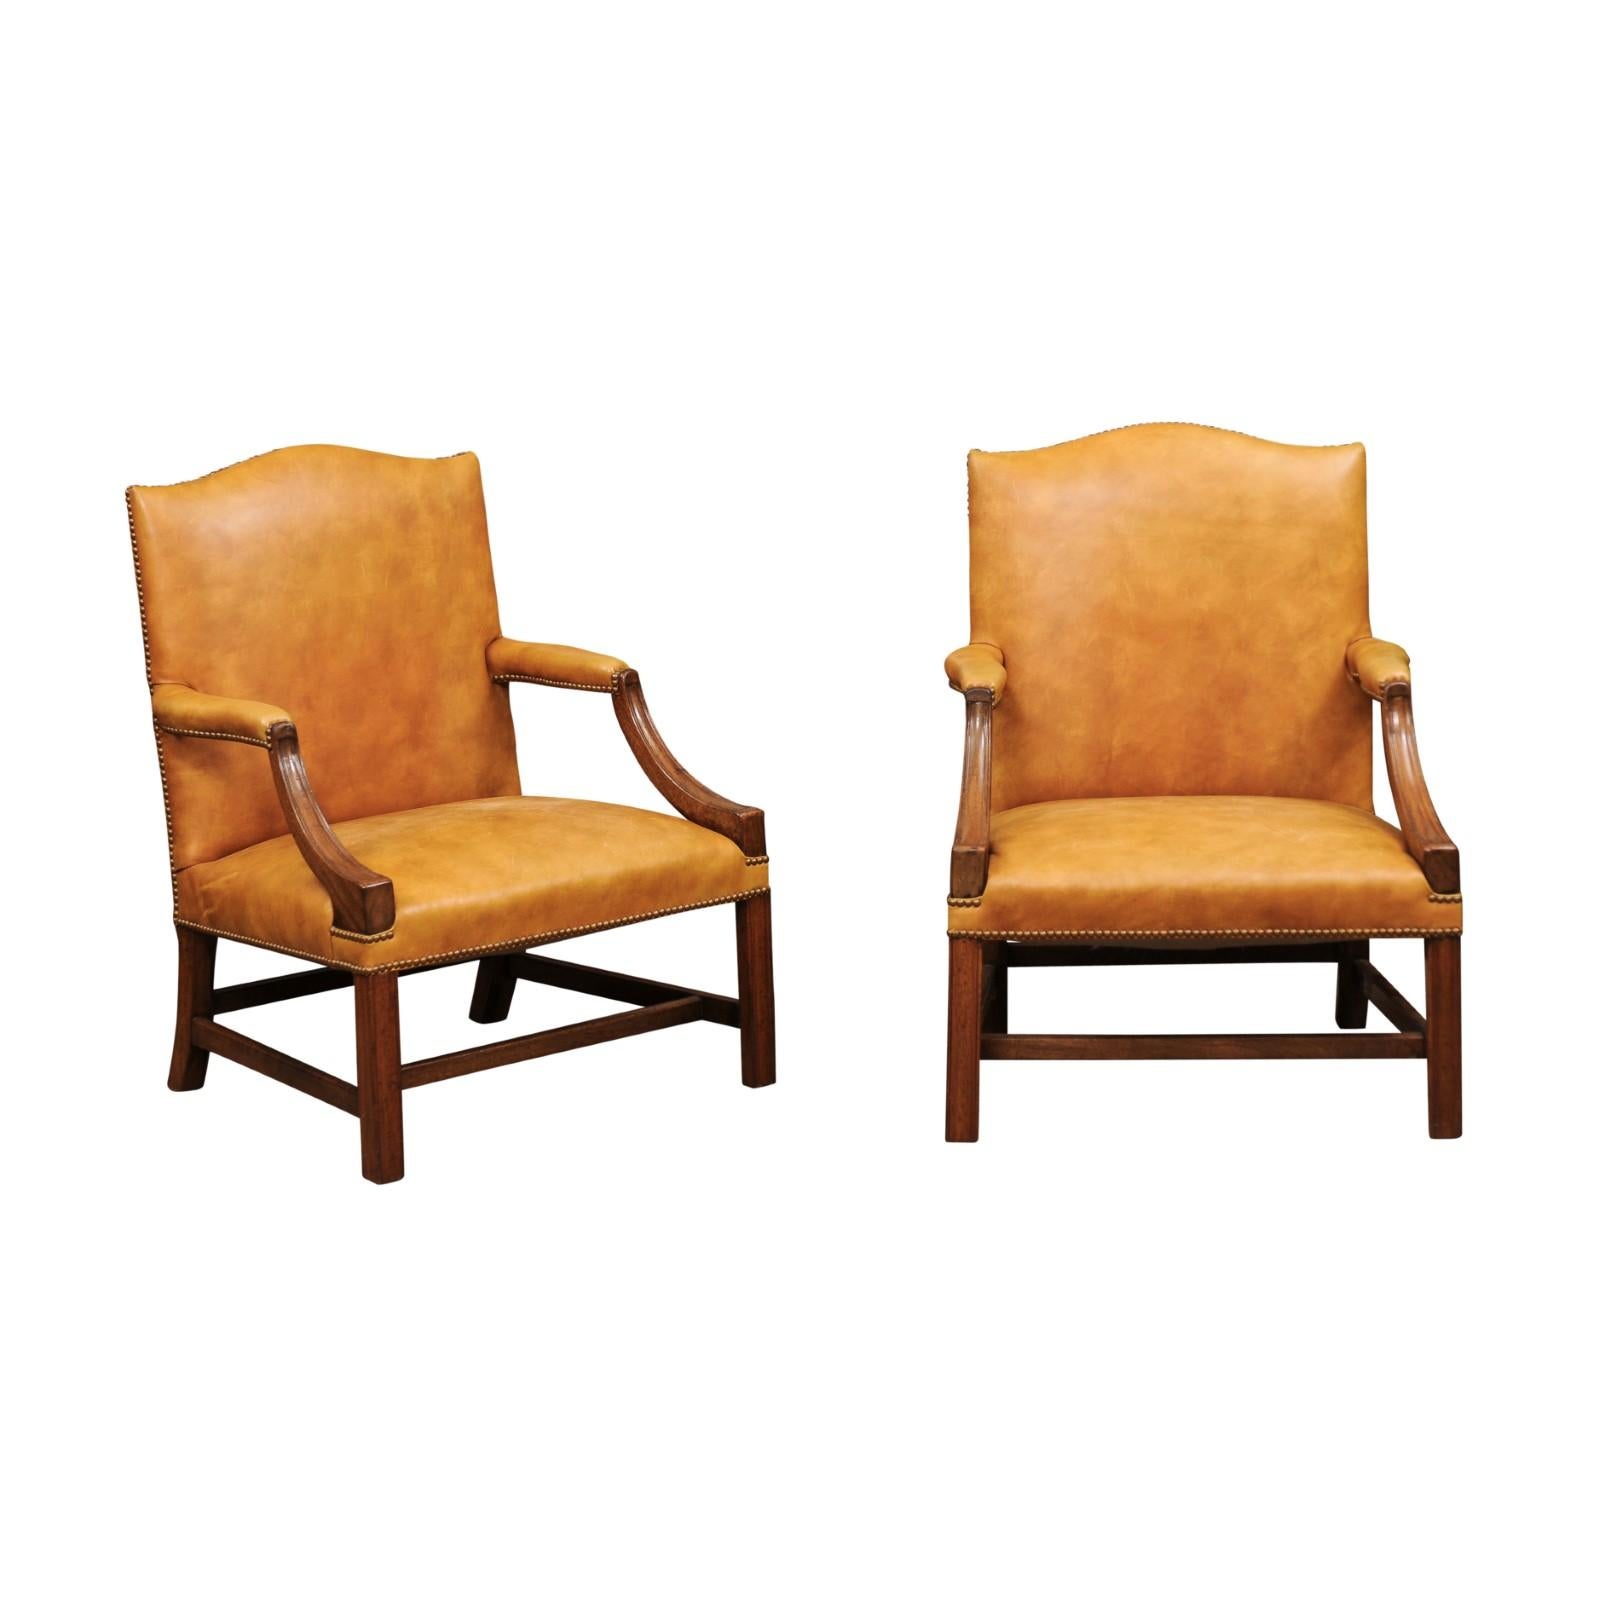 Pair of English Mahogany Library Chairs, 20th Century In Good Condition For Sale In Atlanta, GA